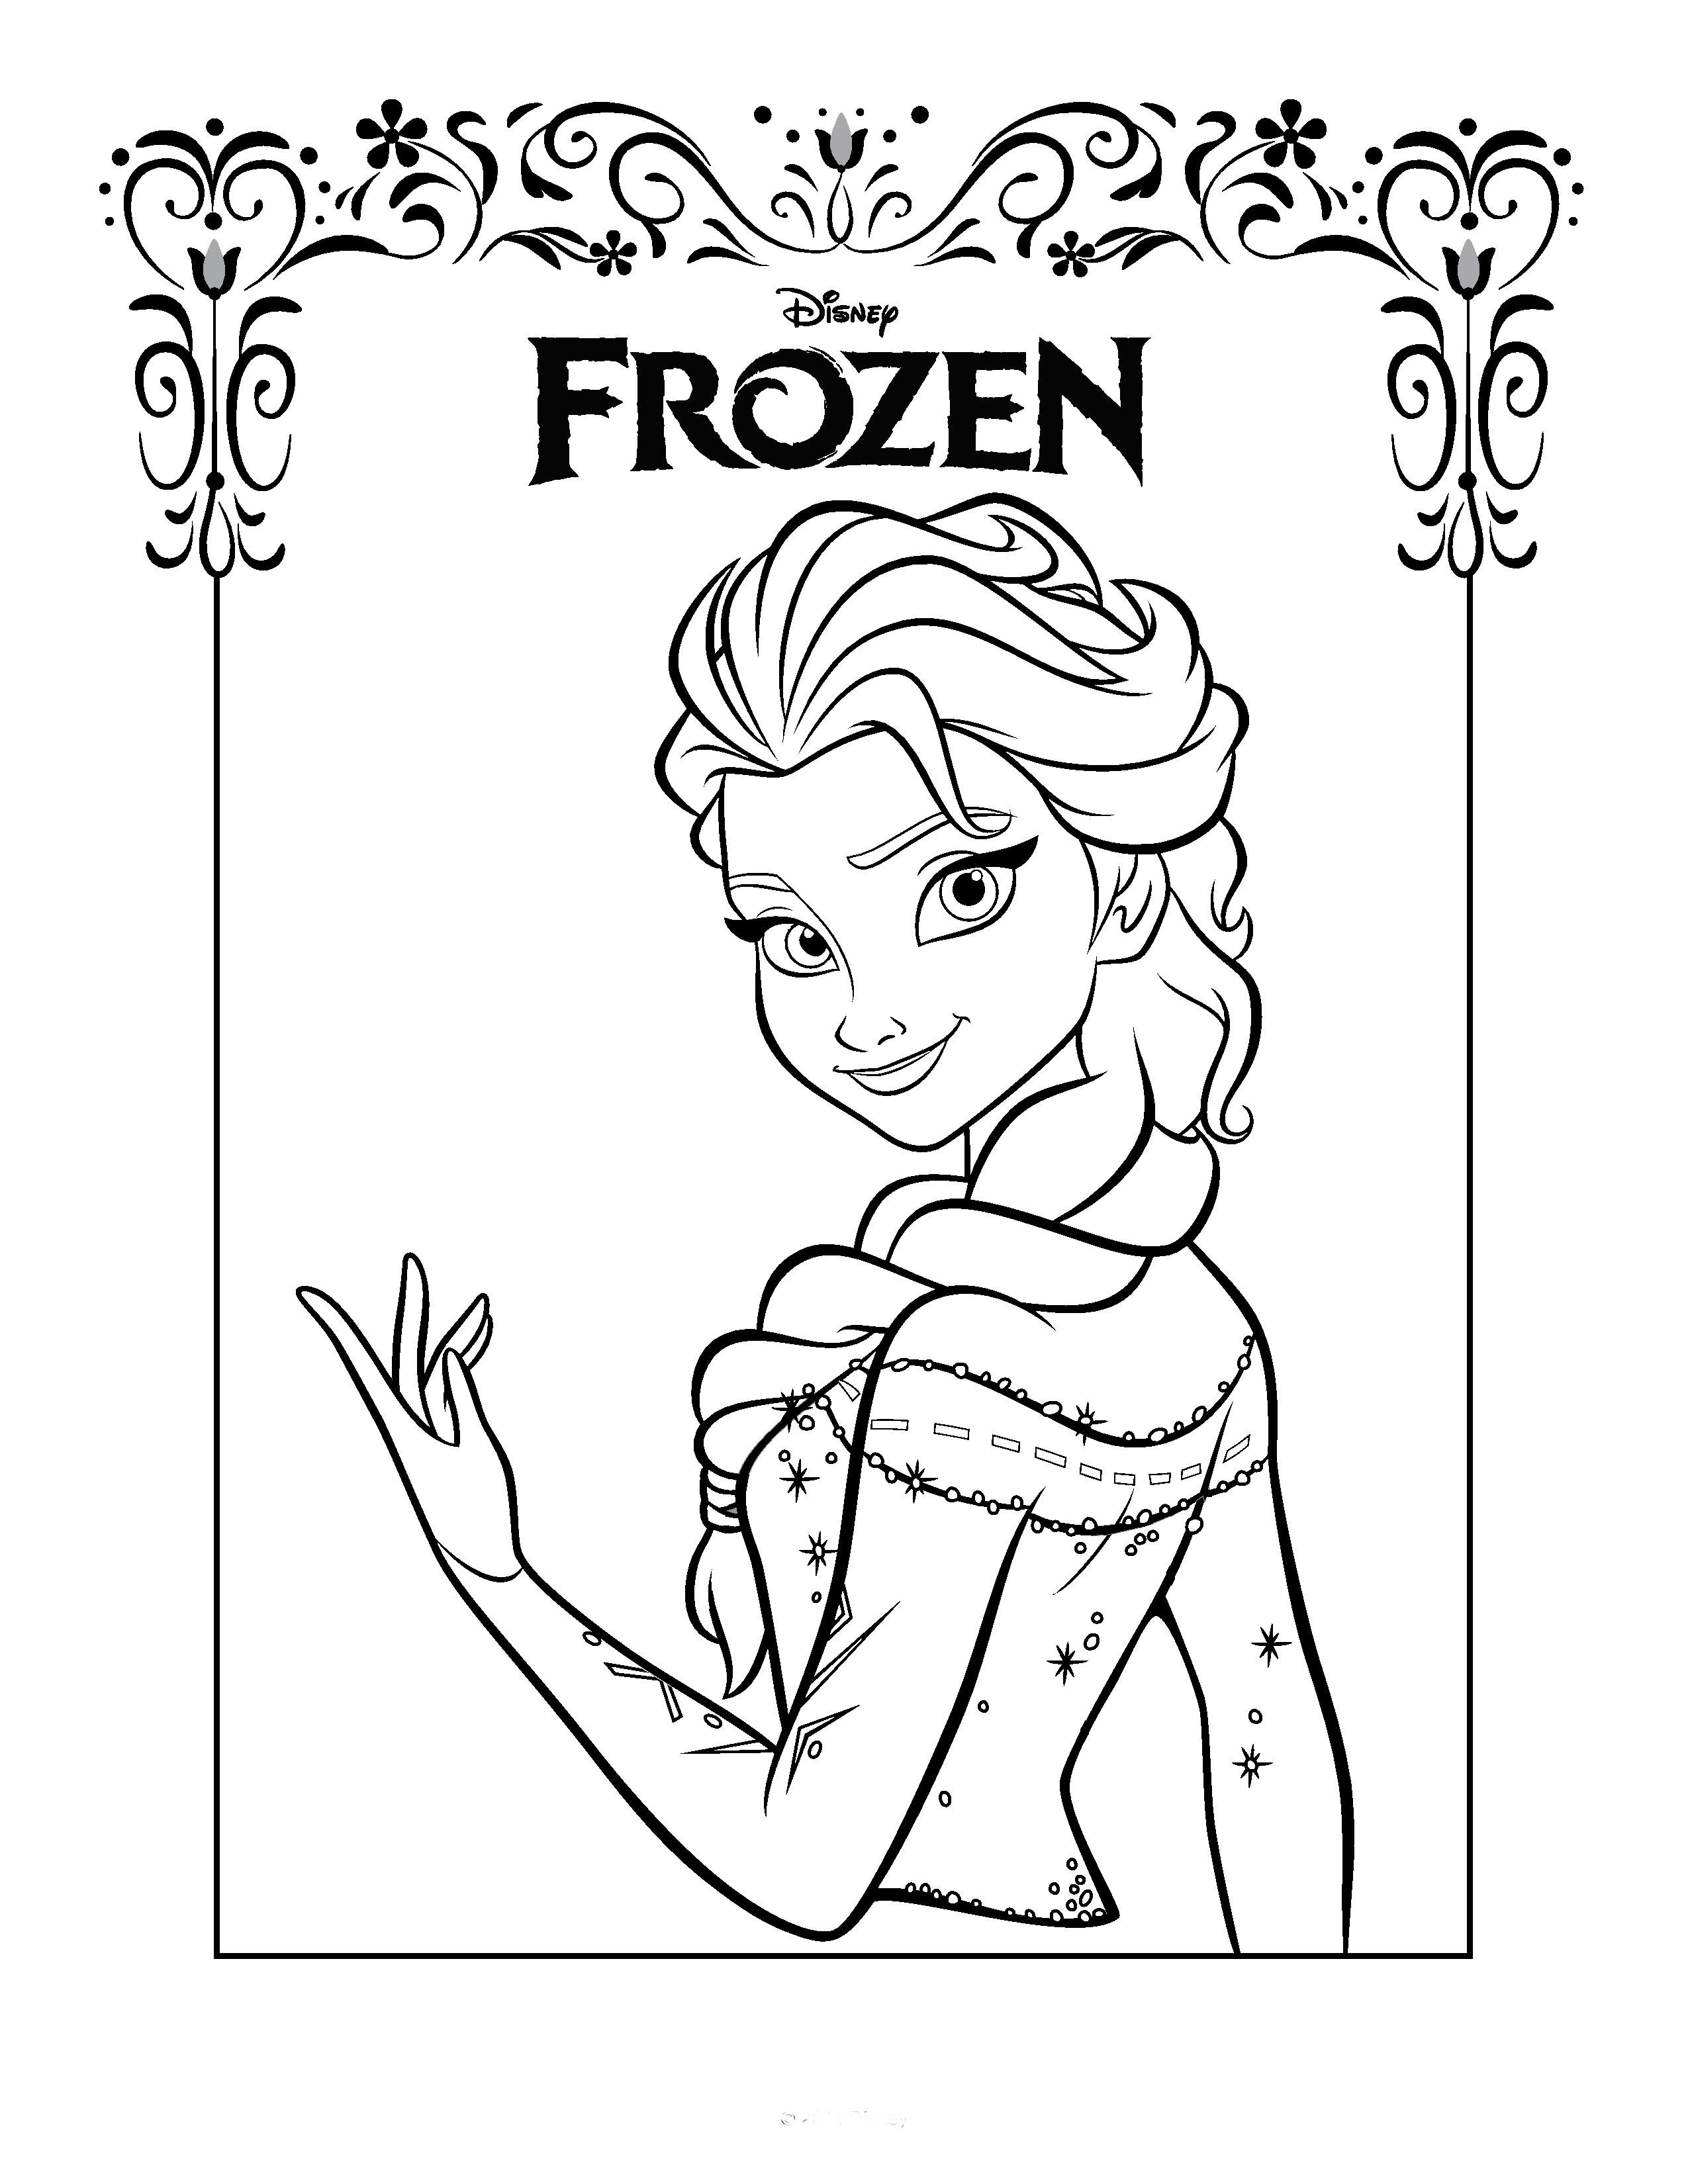 Elsa Frozen Coloring Pages
 Free Printable Frozen Coloring Pages for Kids Best